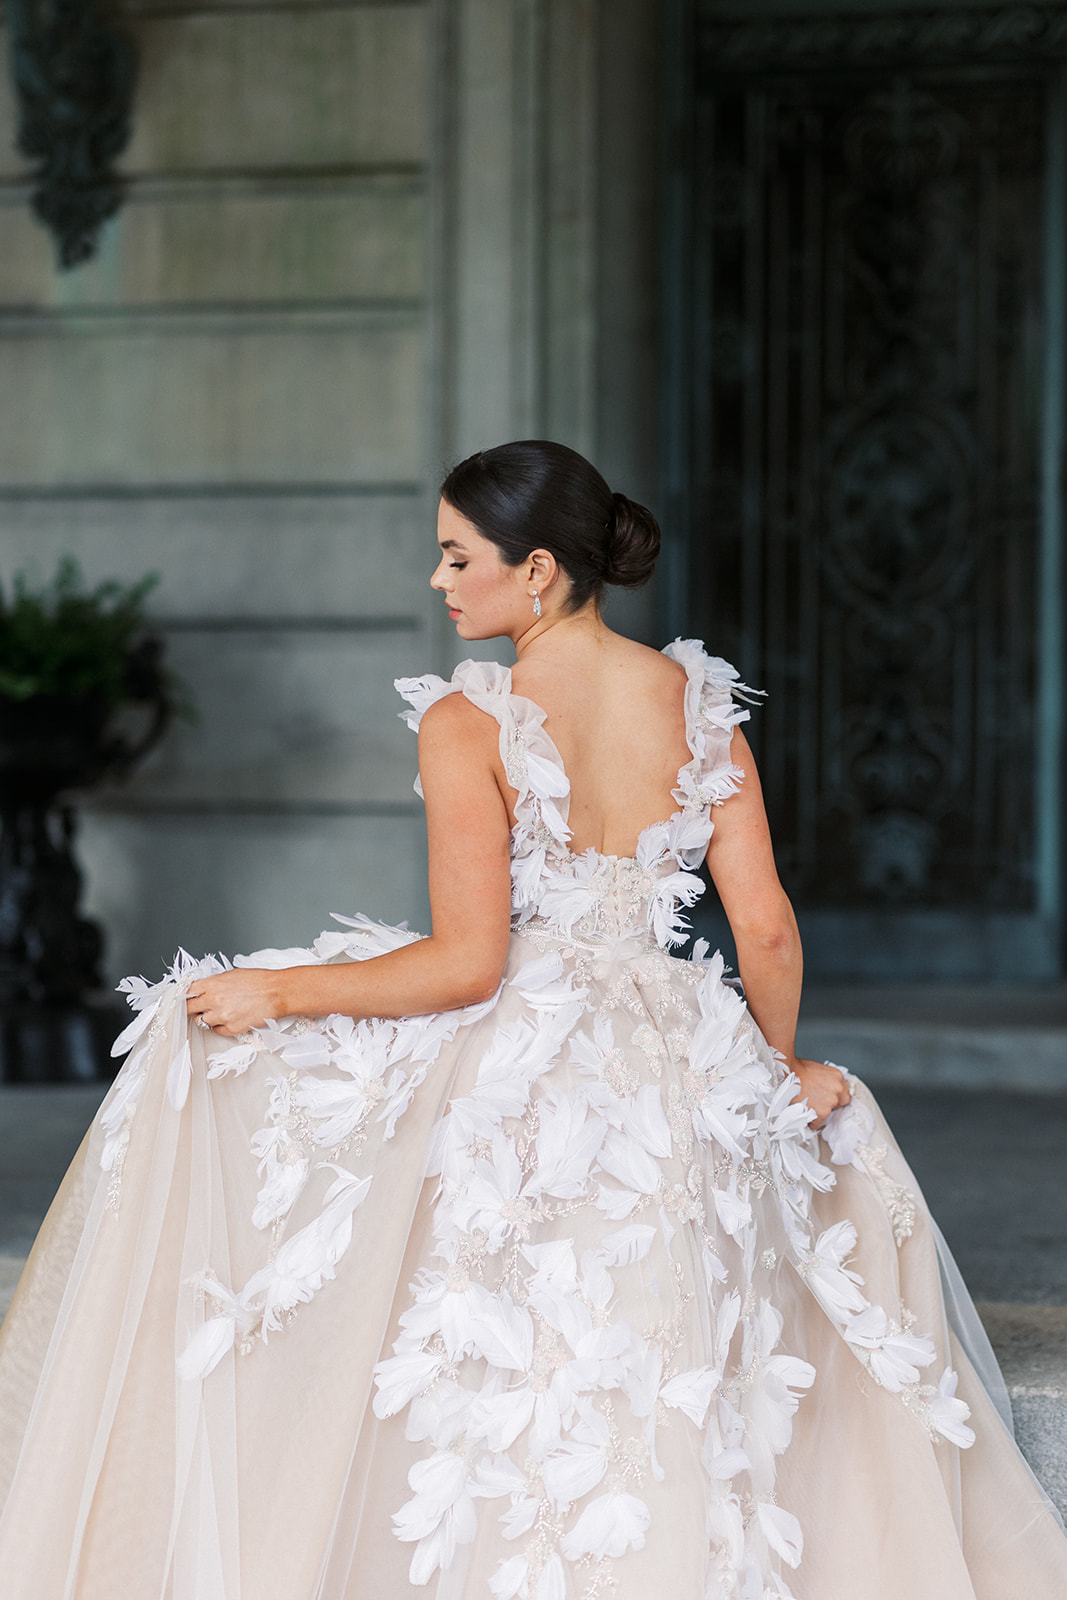 A bride holds her dress while walking up the steps to the large doors of her wedding venue